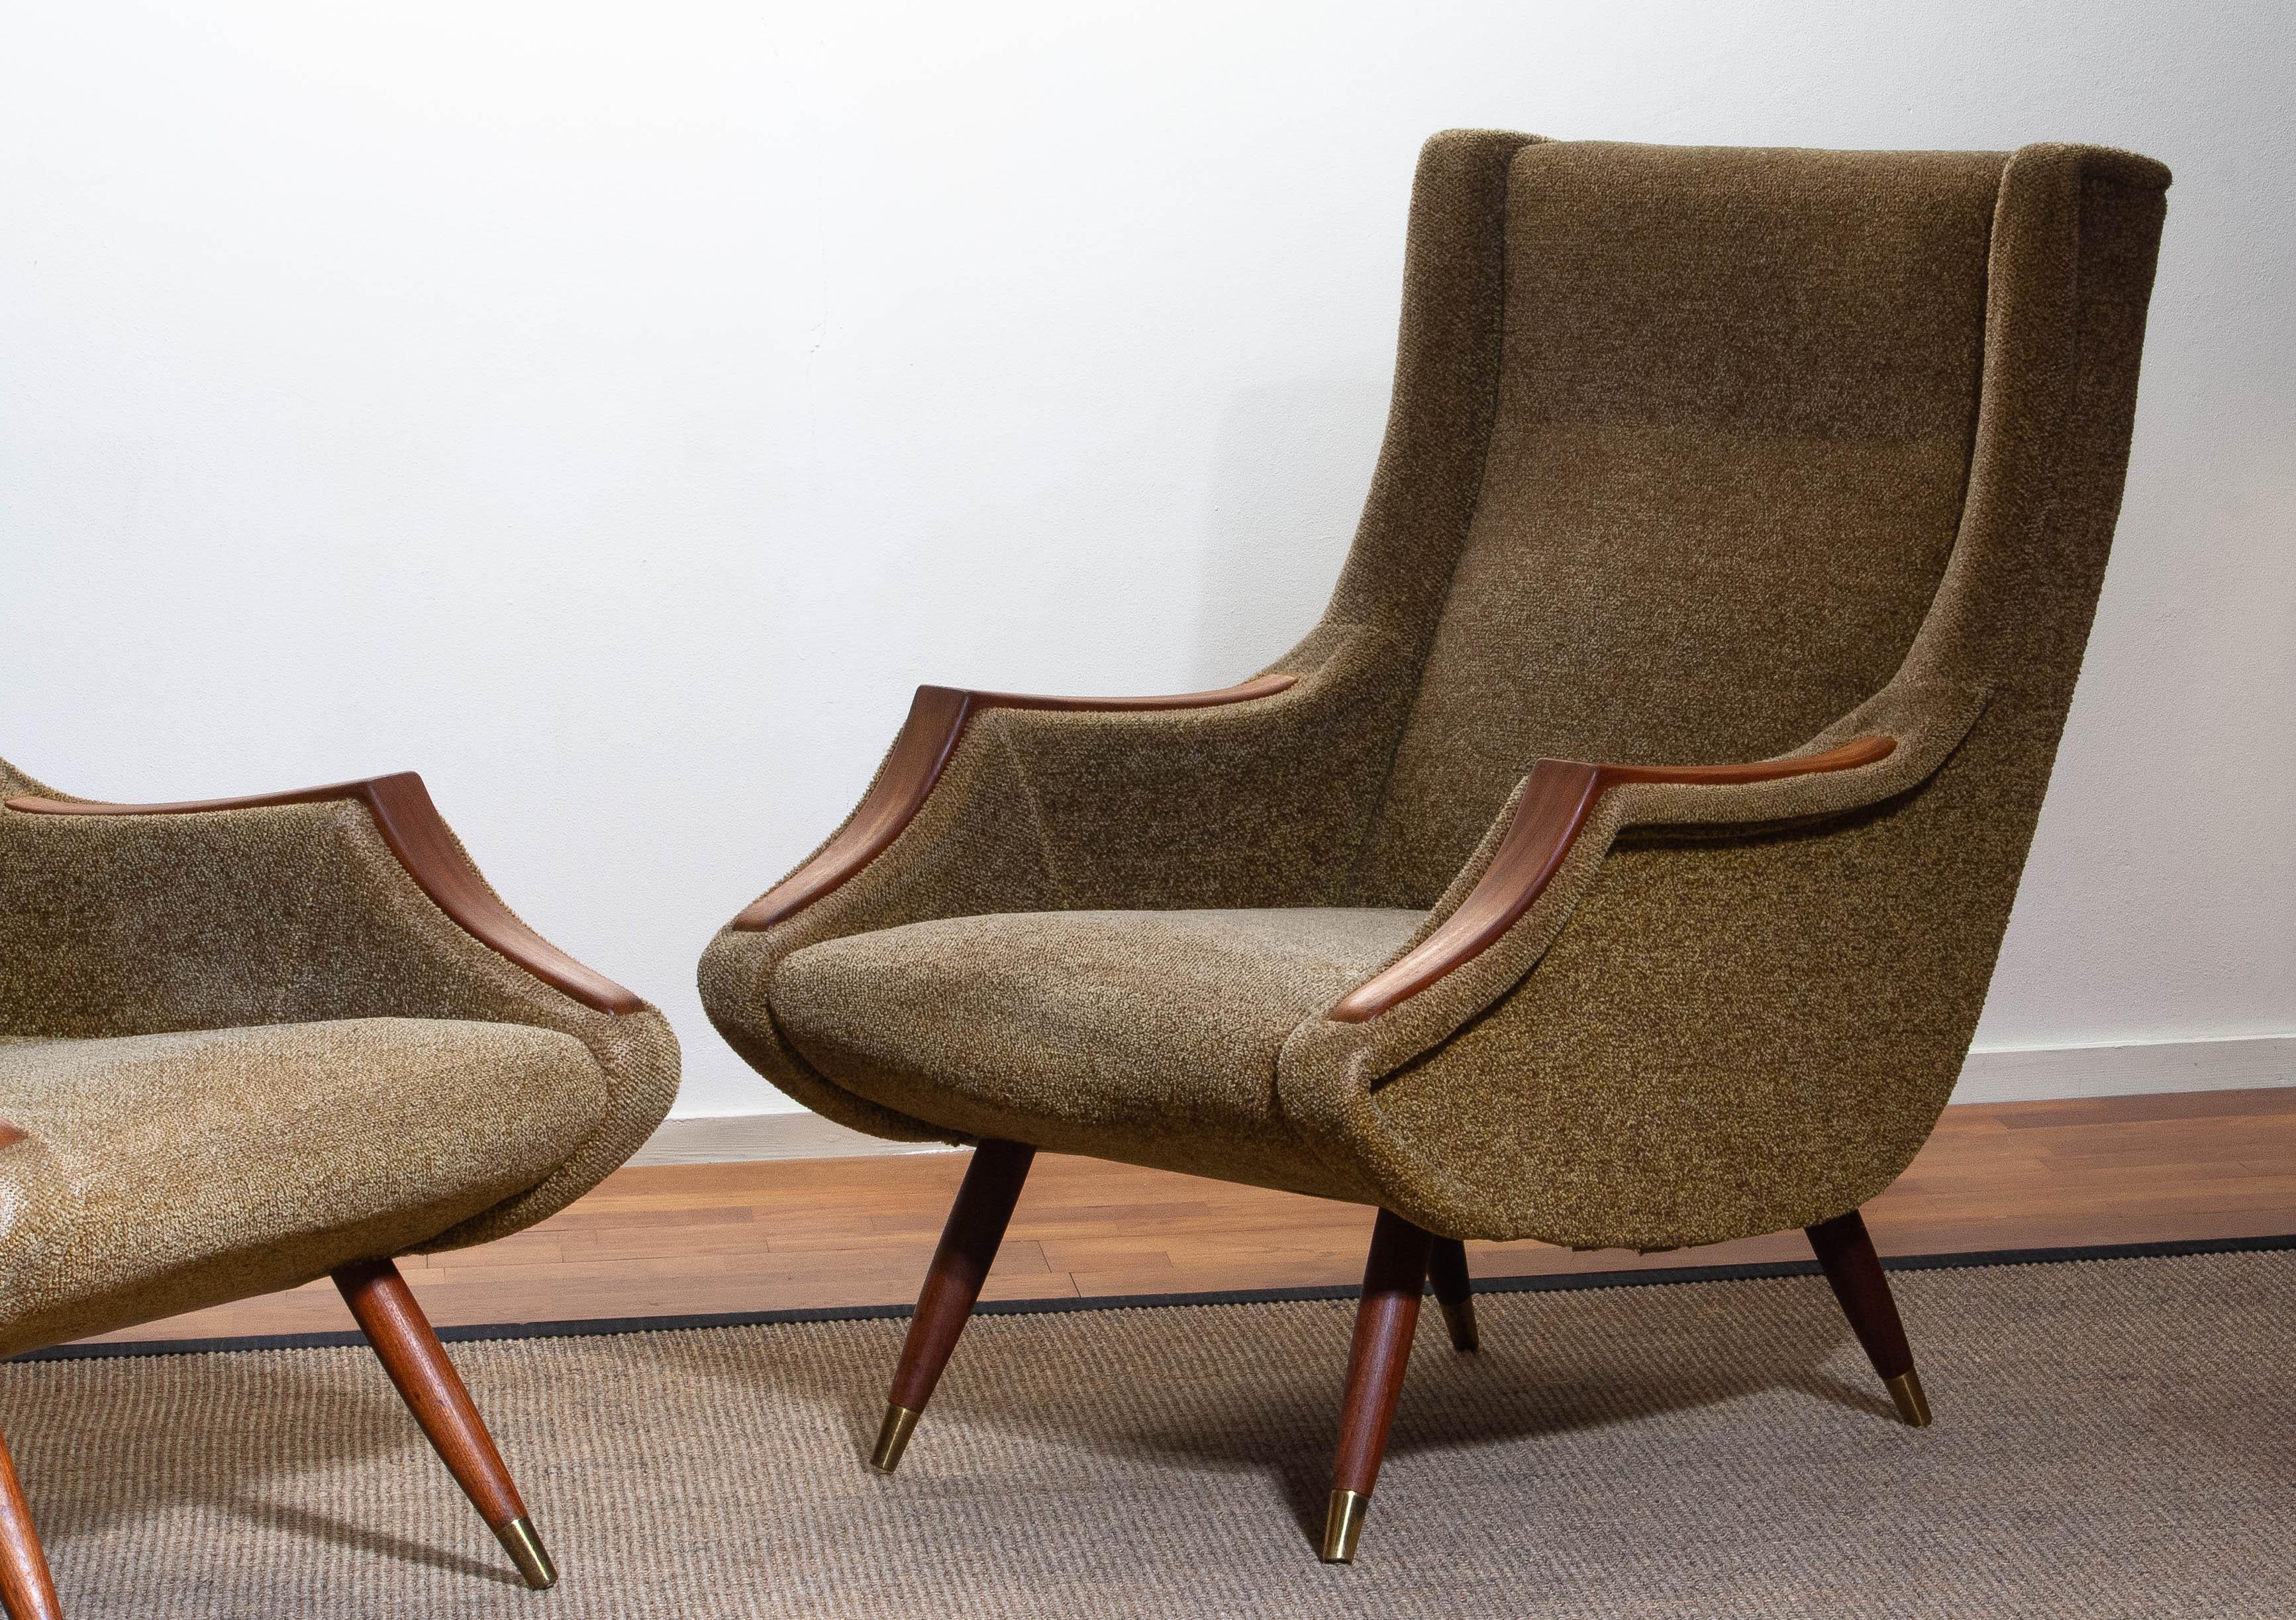 Fabric 1950s, Set of Lounge Easy Club Chairs by Aldo Morbelli for Isa Bergamo, Italy